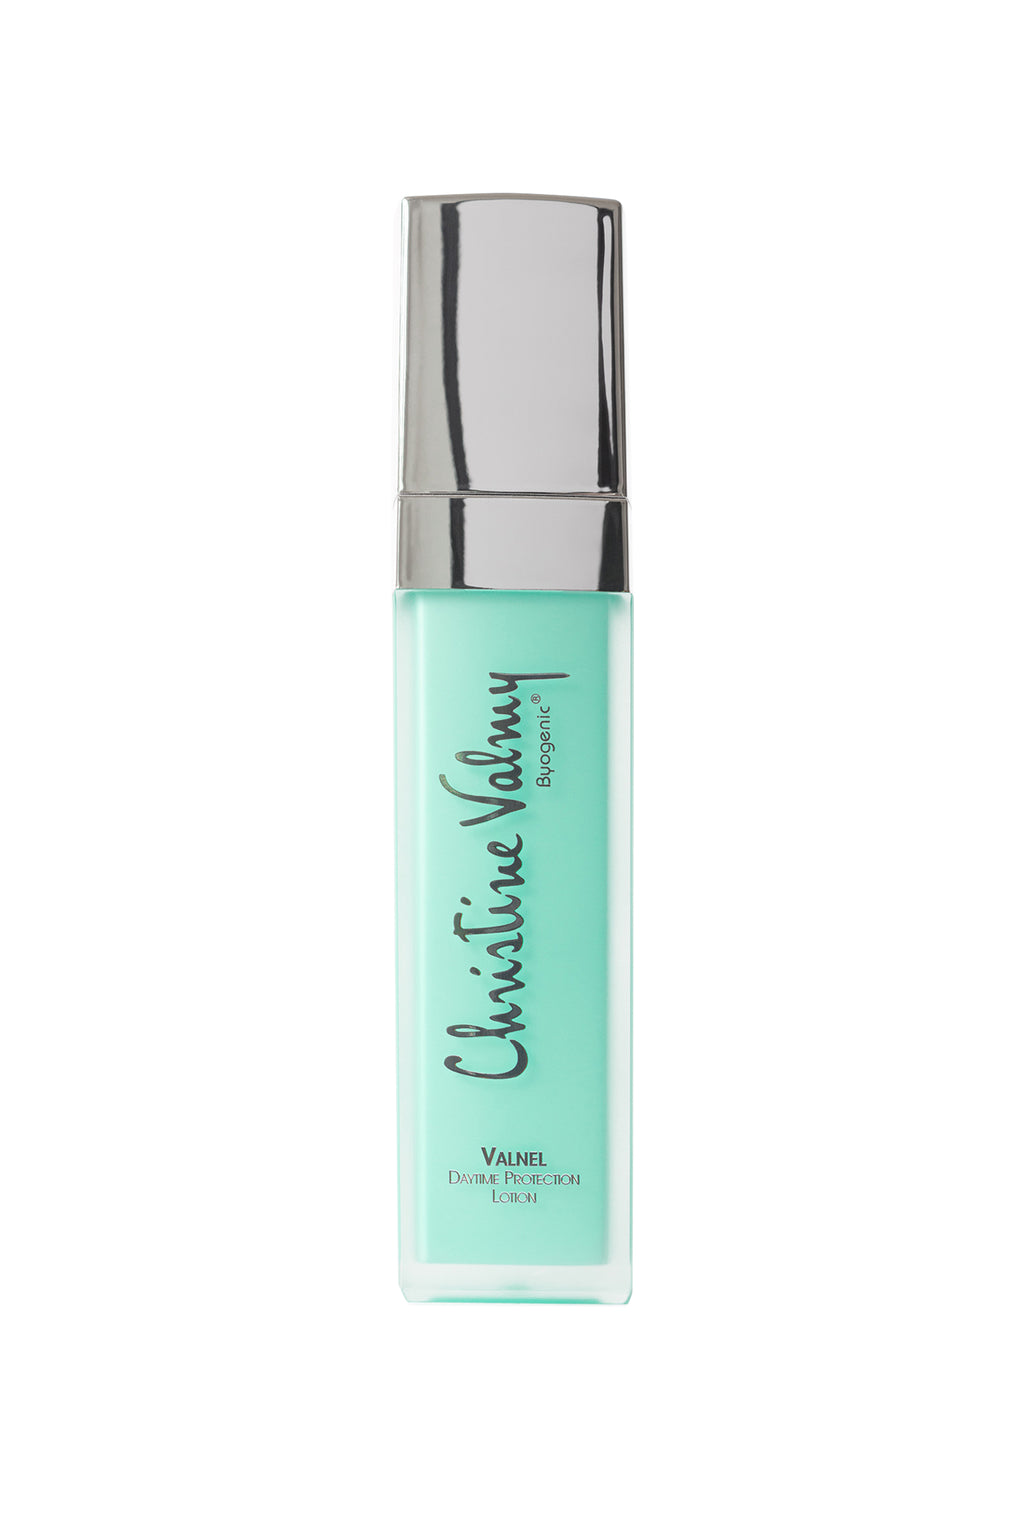 Christine Valmy Valnel hydrating lotion and makeup base, for daily use. 